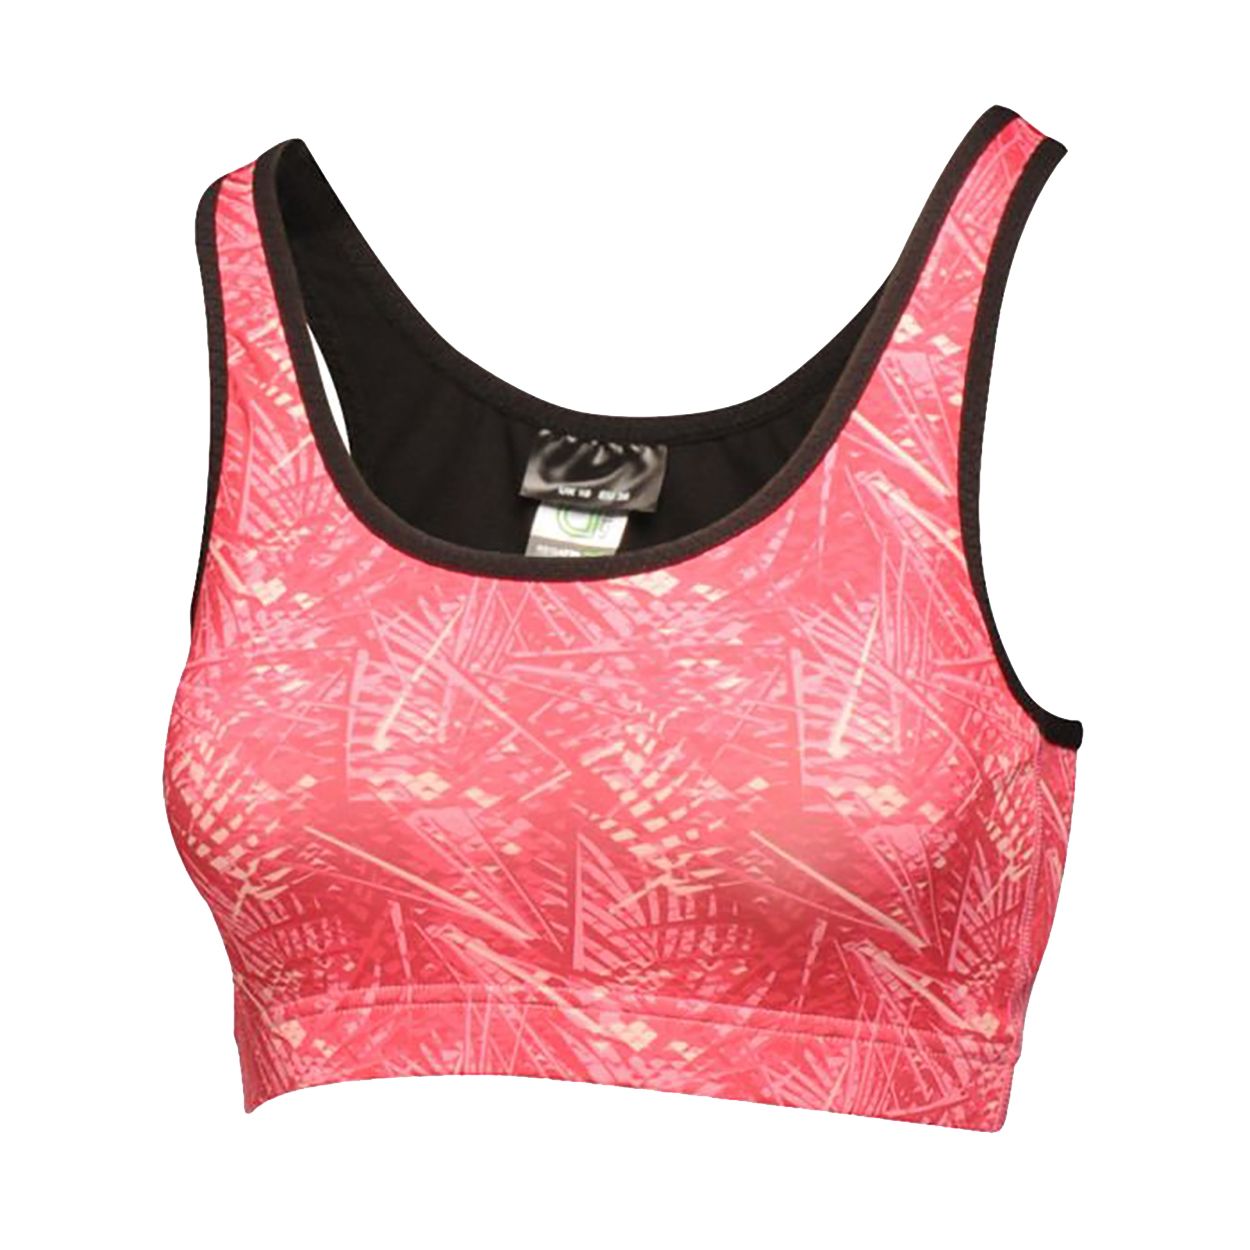 85% polyester, 15% elastane. Good wicking performance. Quick drying. Built-in bra support. Double layer front panel for complete support and comfort.